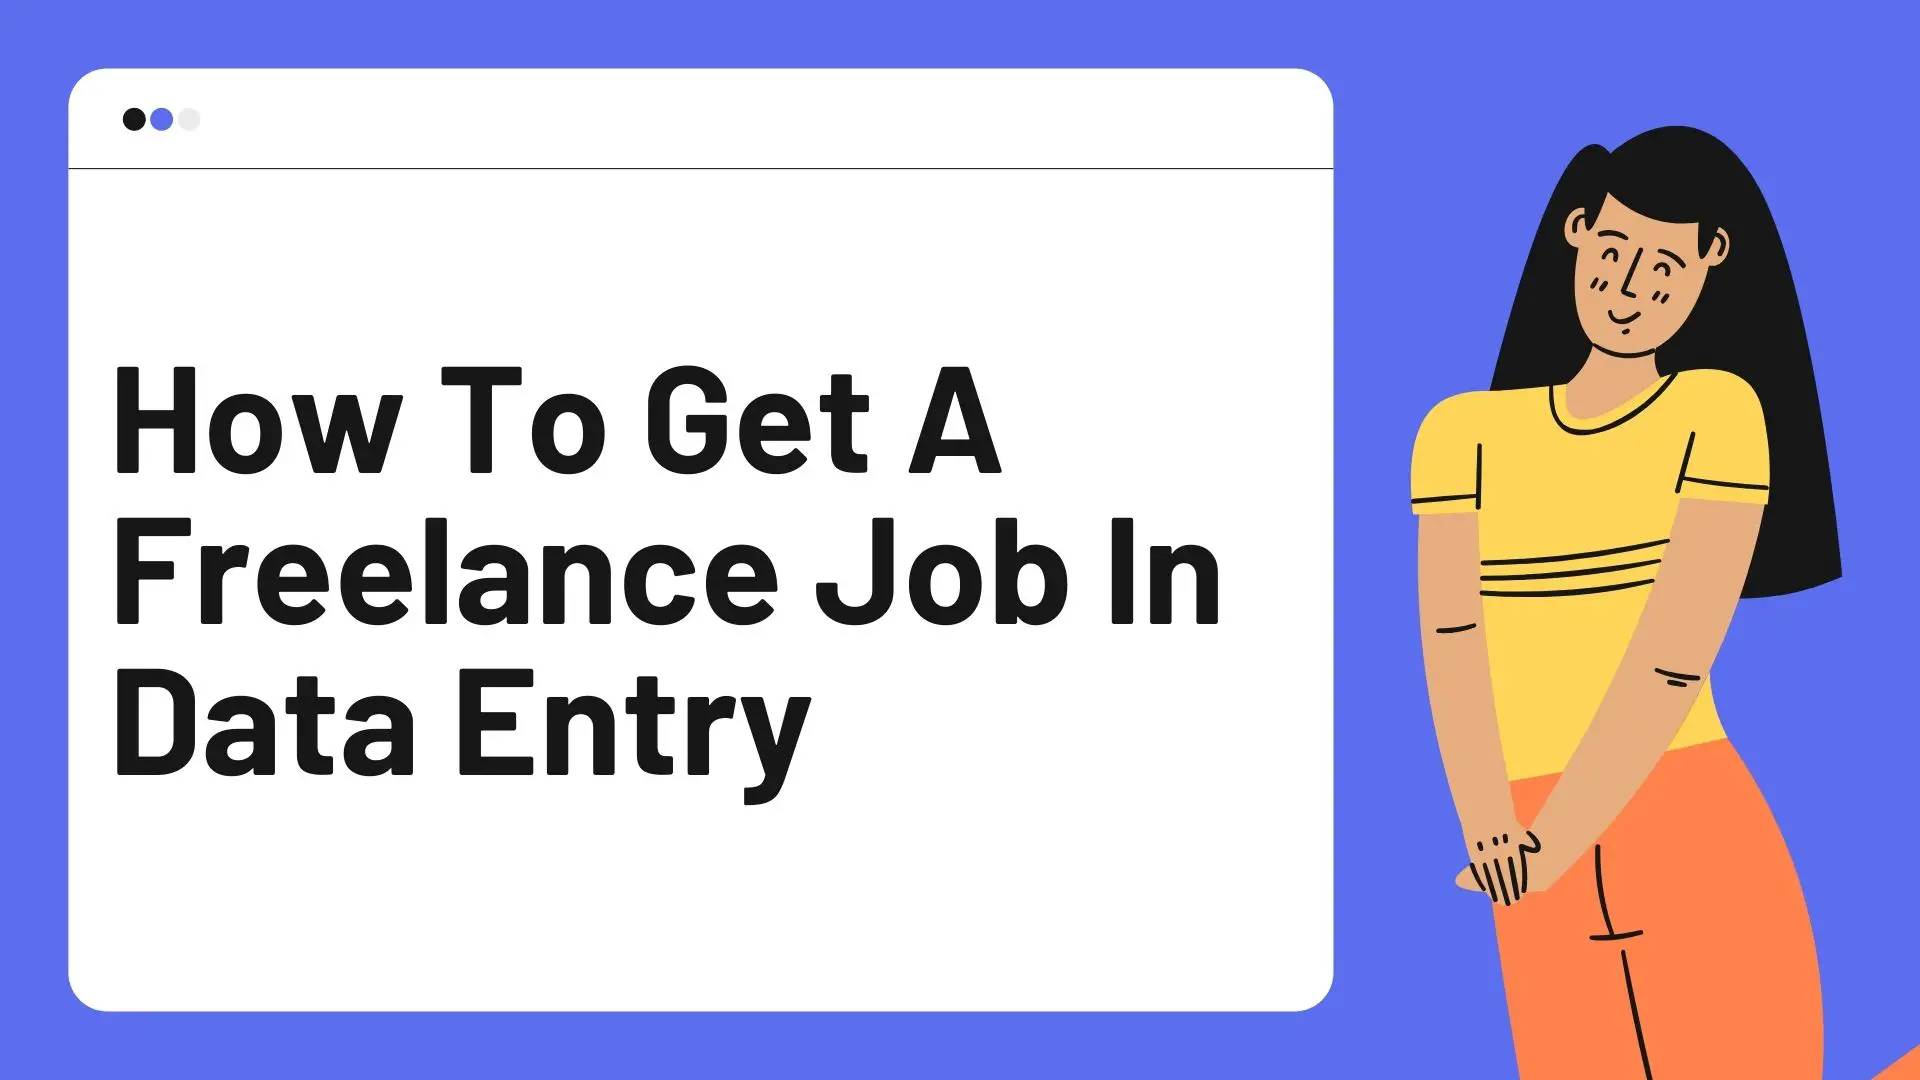 How To Get A Freelance Job In Data Entry